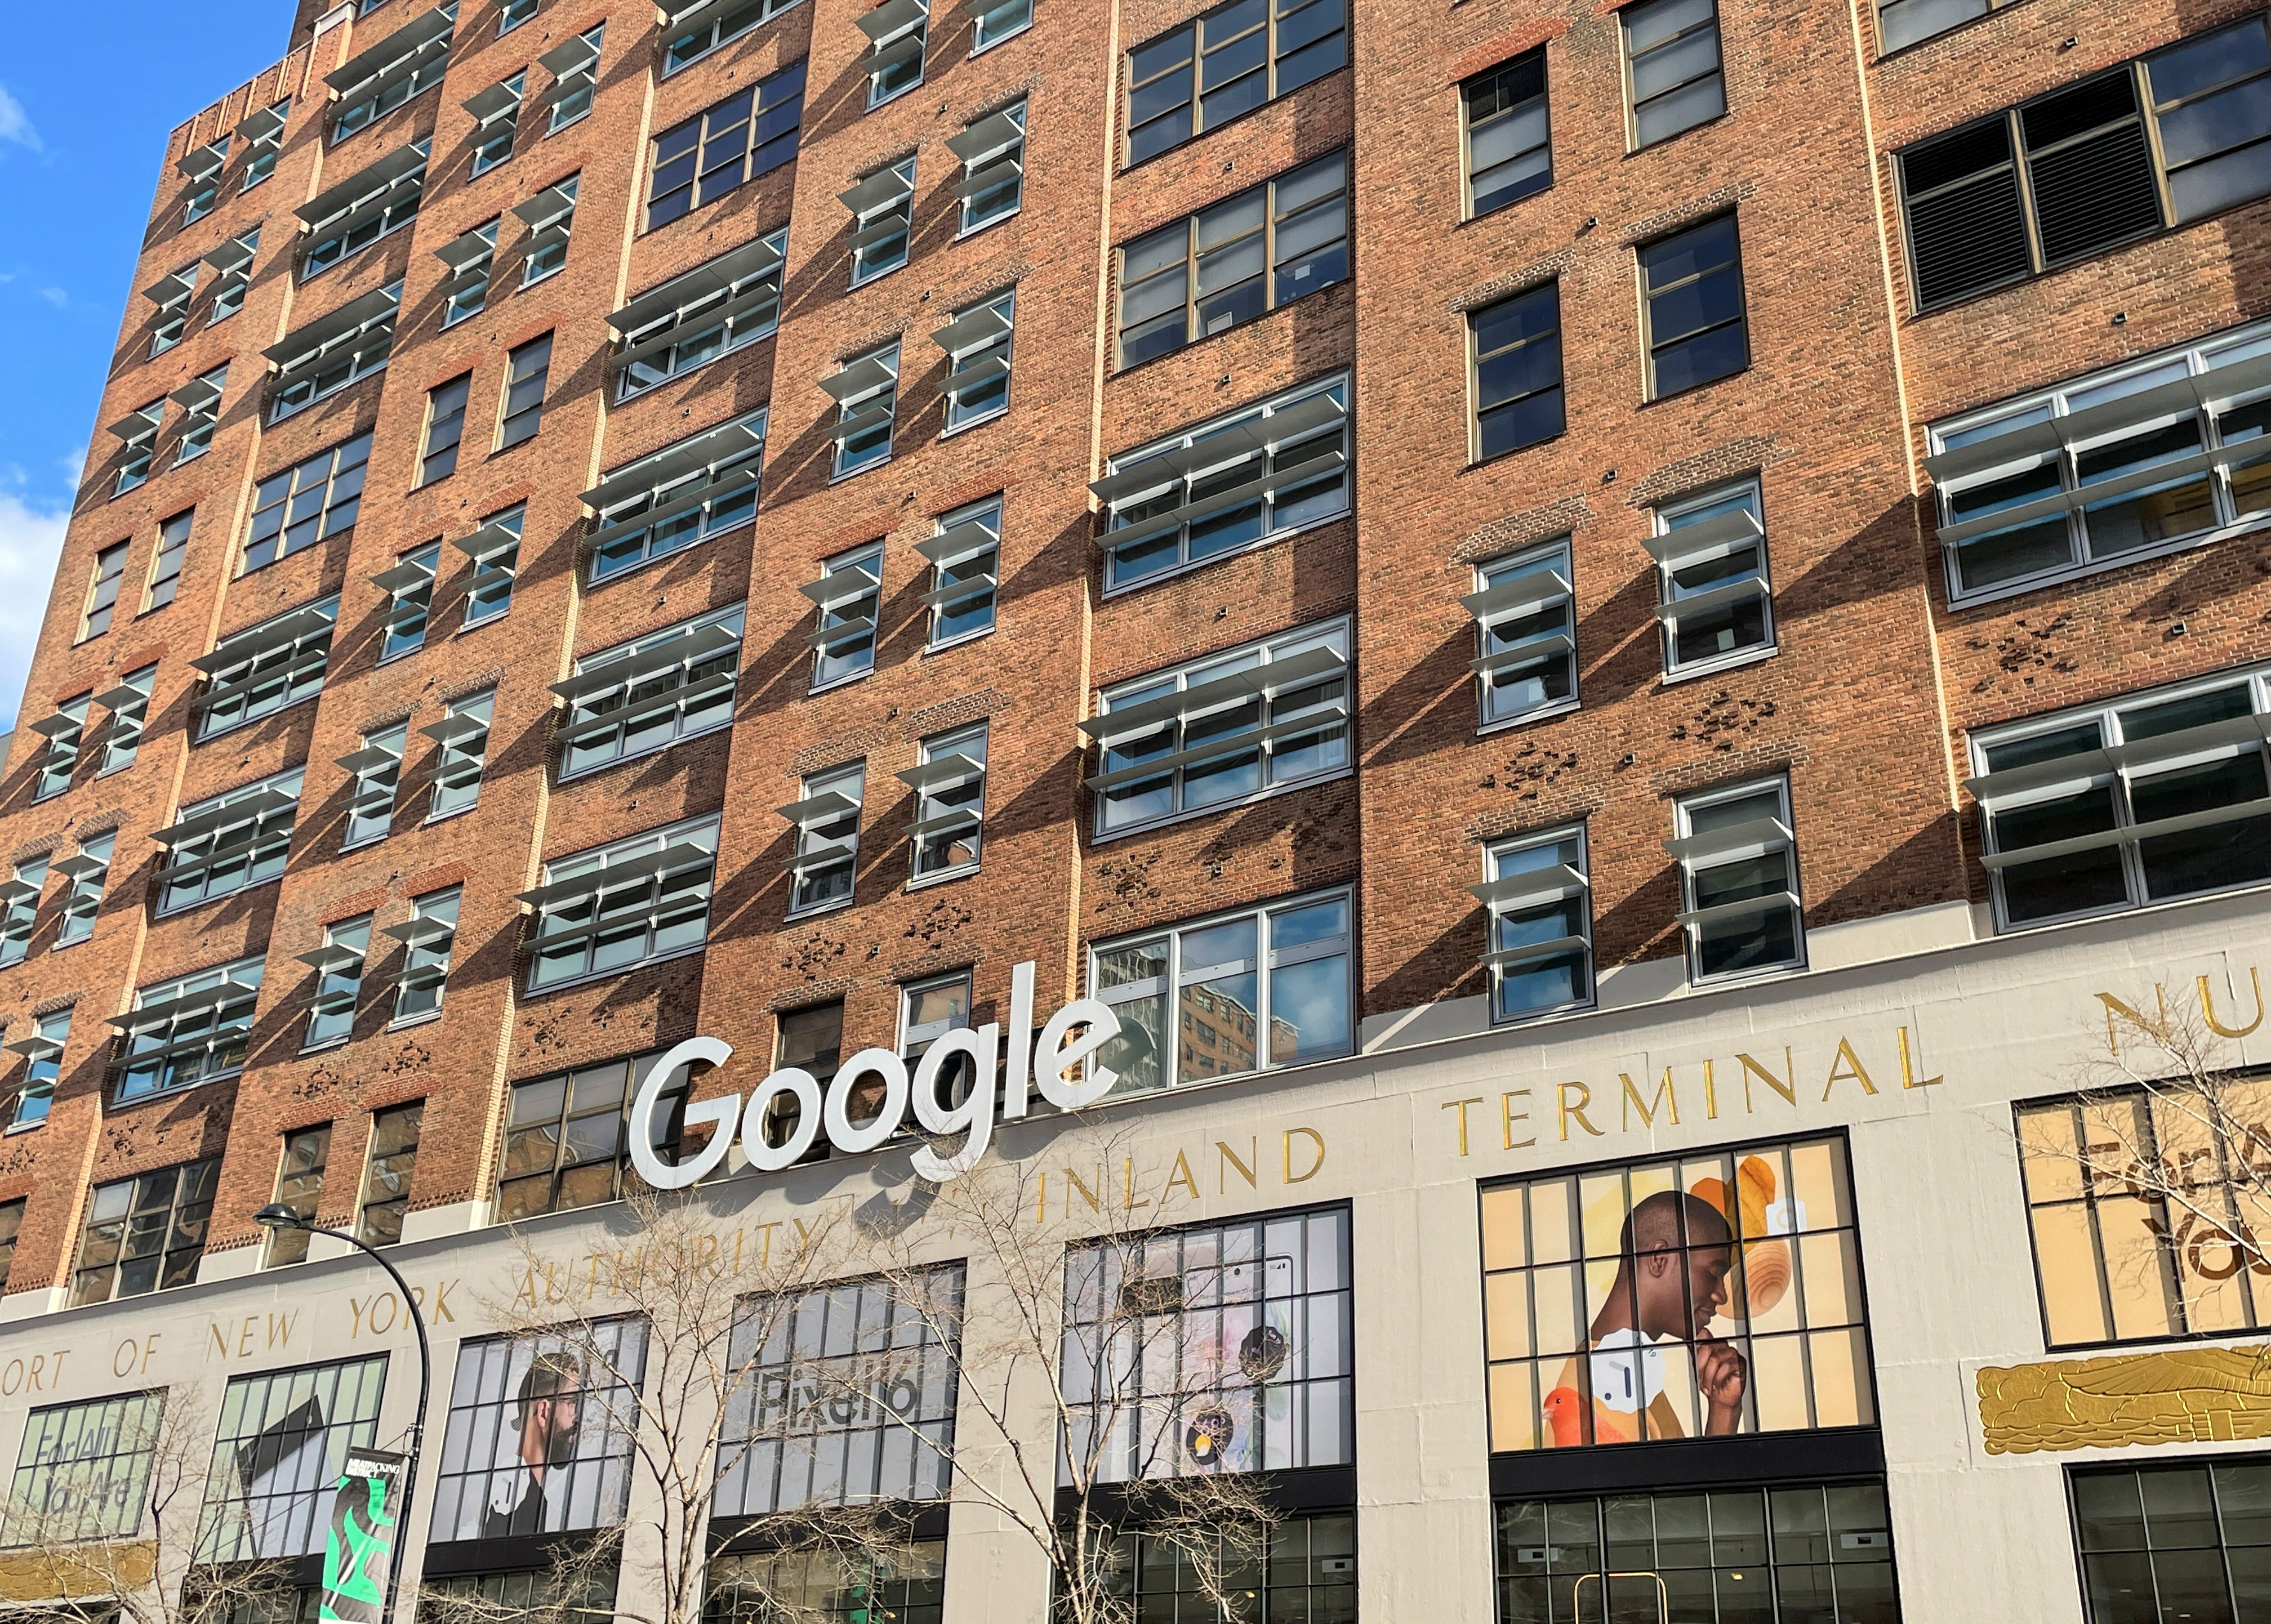 The facade of a Google office is seen in New York City